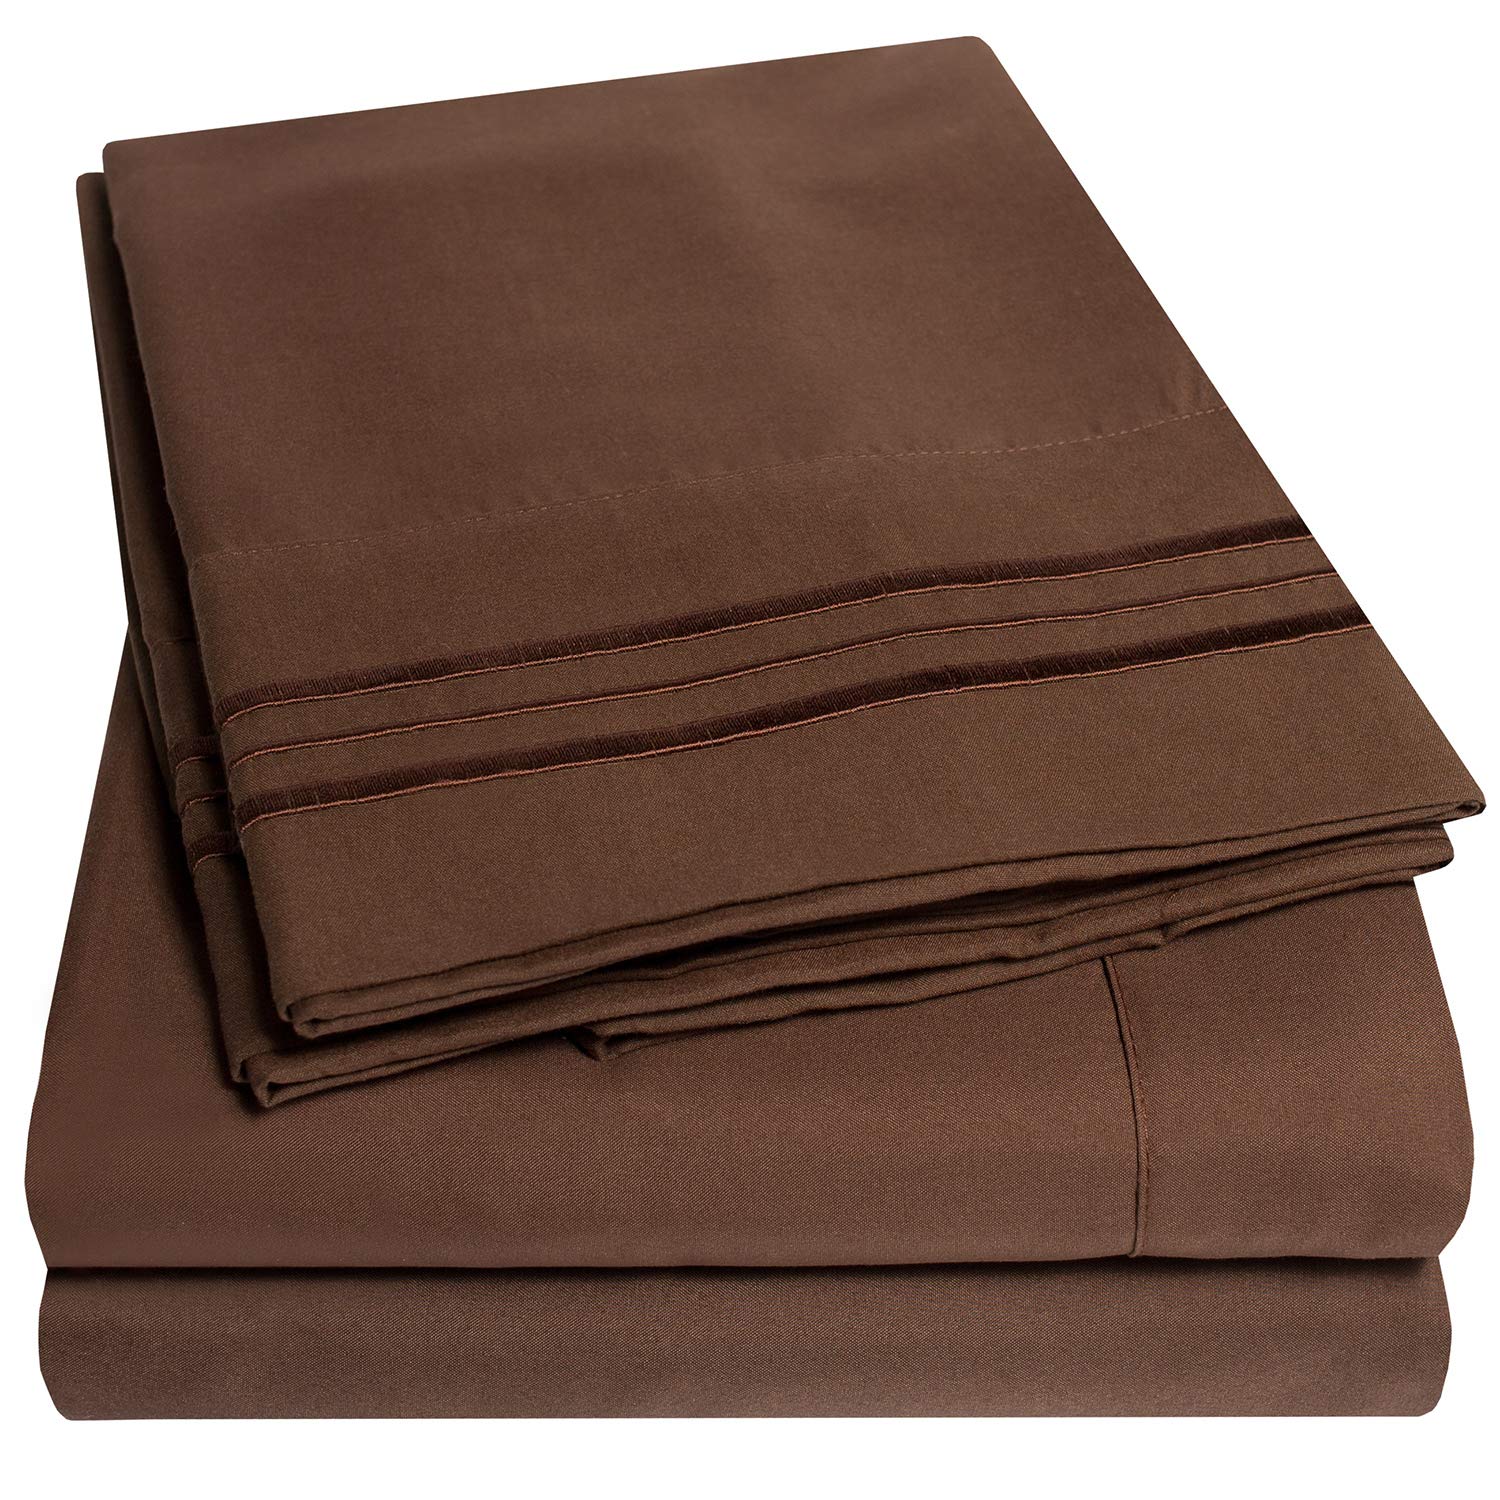 Book Cover 1500 Supreme Collection Bed Sheets - PREMIUM QUALITY BED SHEET SET & LOWEST PRICE, SINCE 2012 - Deep Pocket Wrinkle Free Hypoallergenic Bedding - Over 40+ Colors - California King, Brown California King Brown